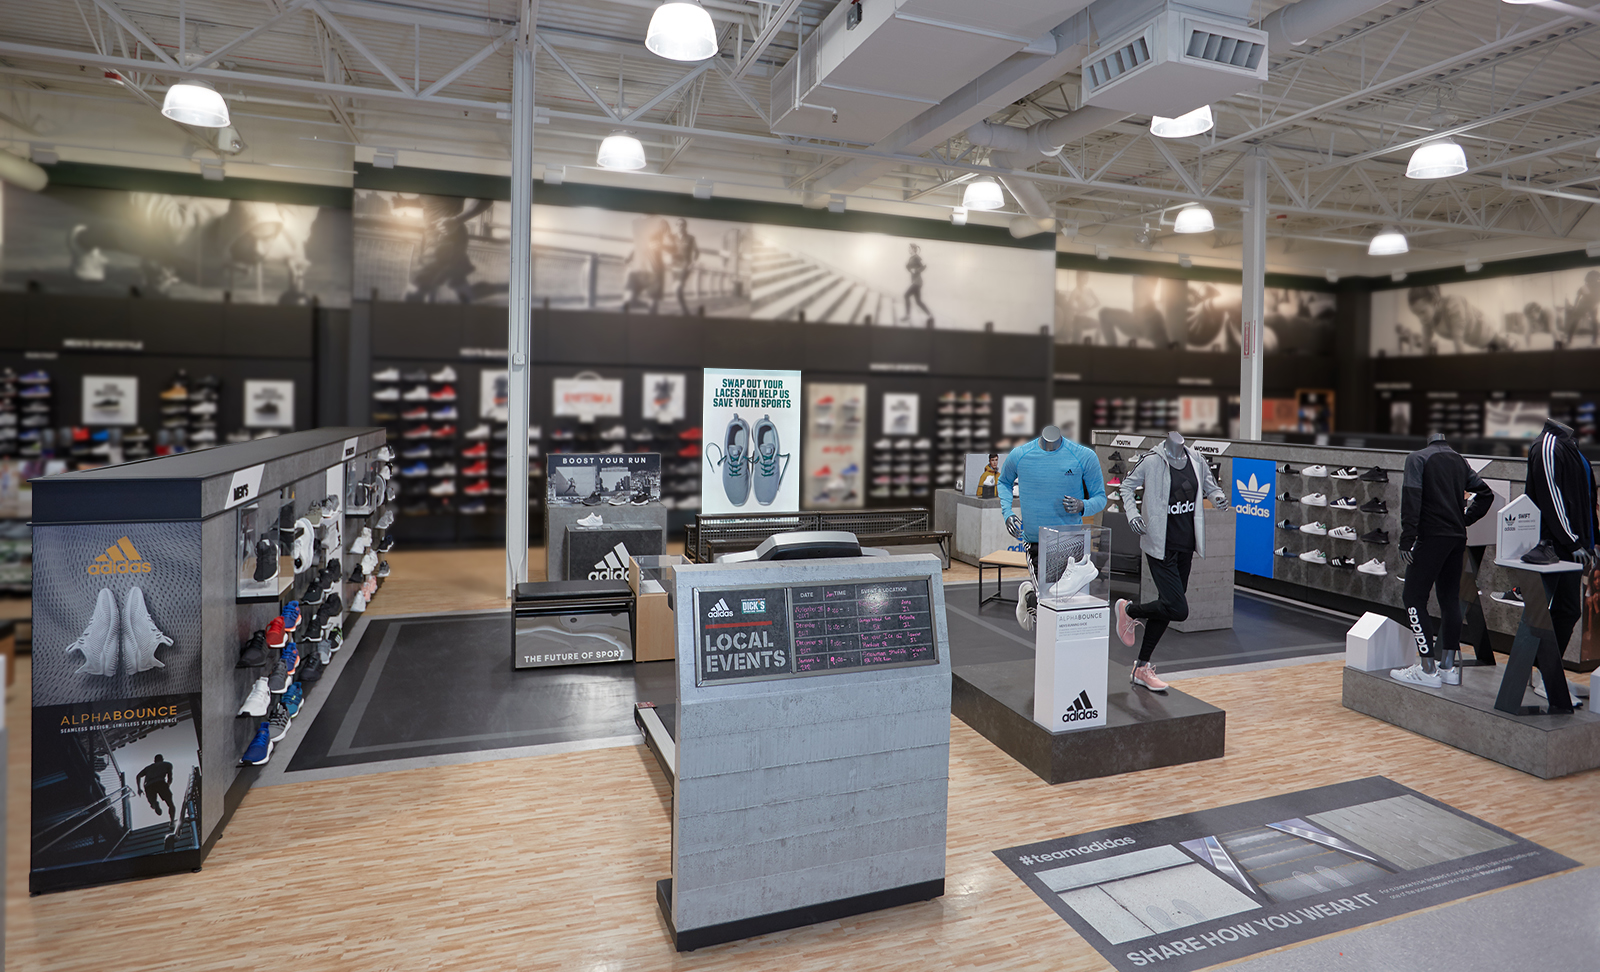 Full view of the custom designed space for Adidas that lives inside a sporting goods store.